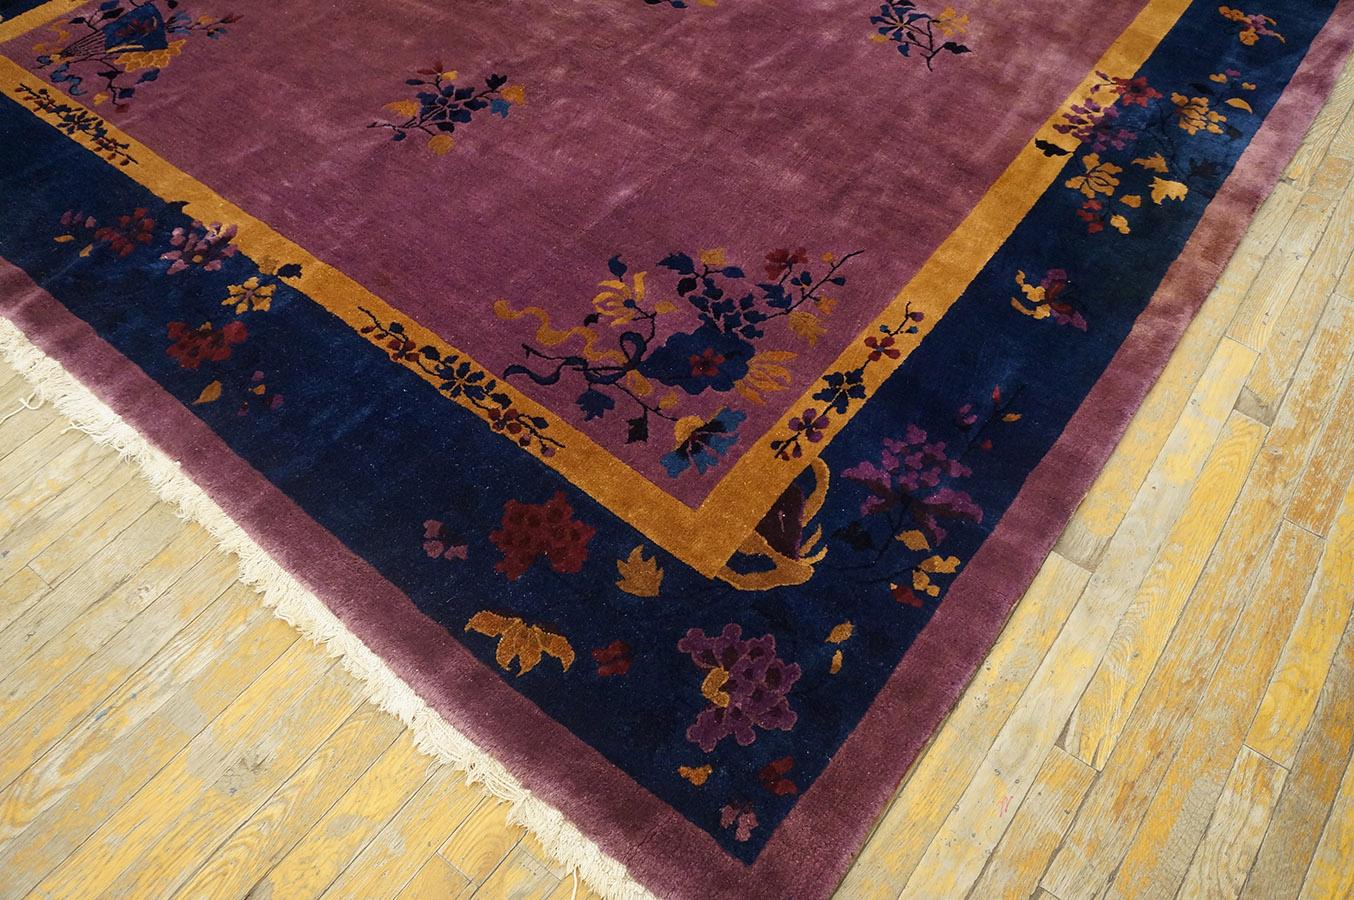 Early 20th Century 1920s Chinese Art Deco Carpet ( 8' x 9' 8'' - 245 x 295 cm ) For Sale